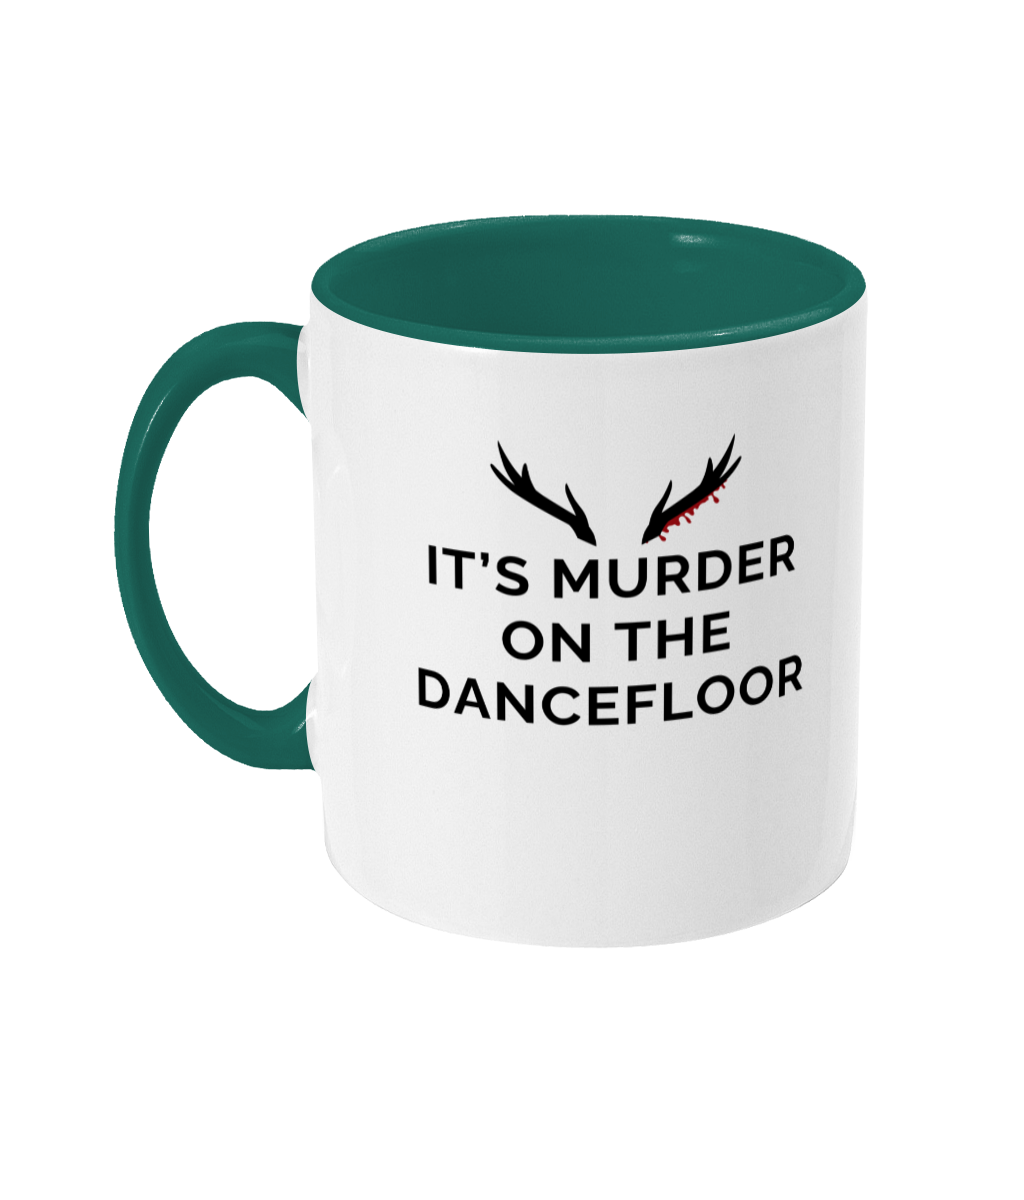 Mug with a green handle and green inner that reads "It's Murder On The Dancefloor" with antlers above the text with blood drips coming from the right bottom antler